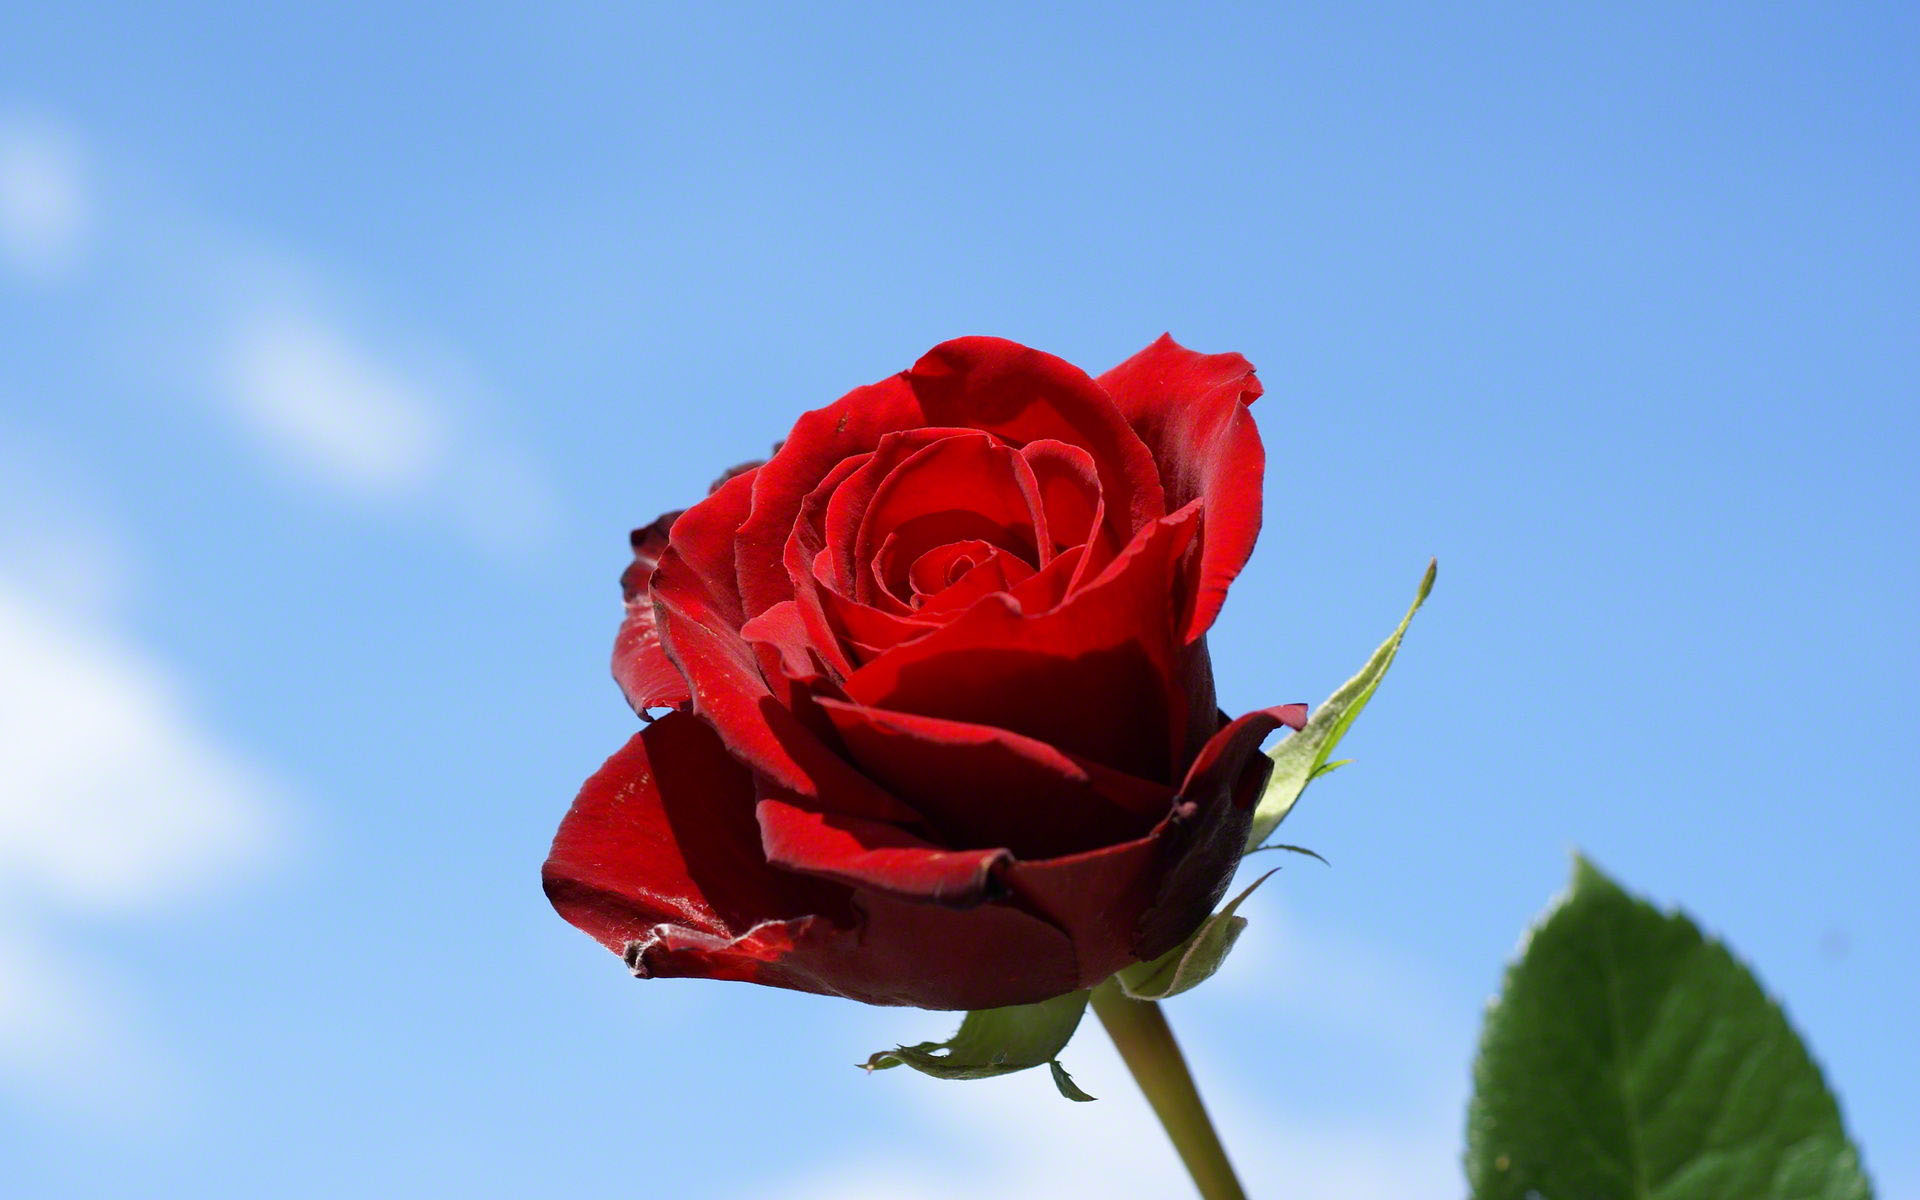 Single rose with blue sky background